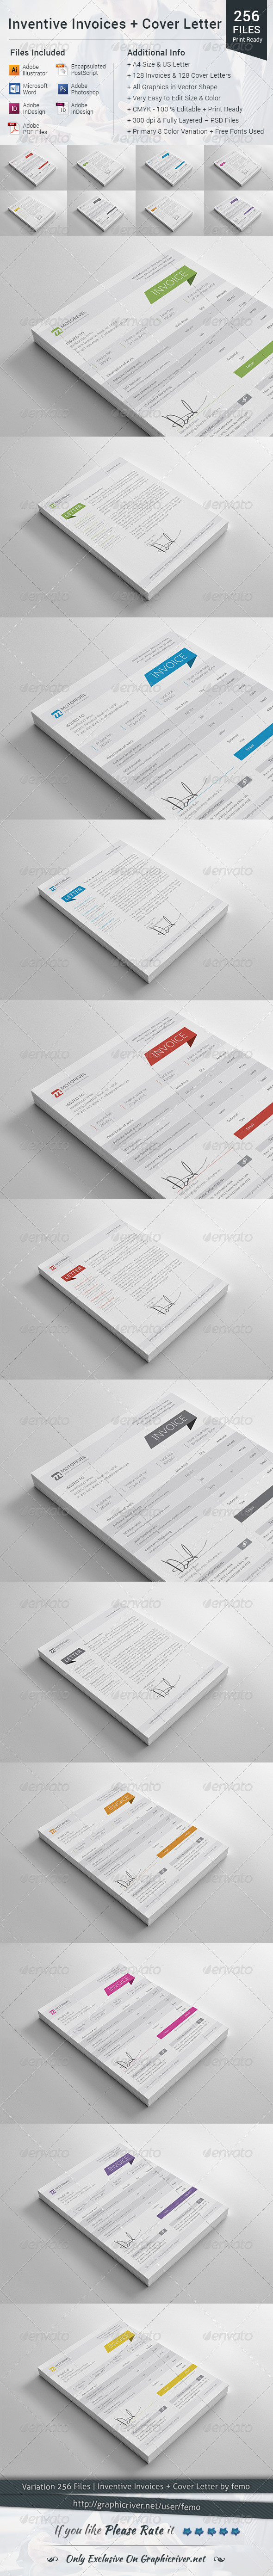 Invoice invoices invoice template invoices with ms word professional invoices company invoice indesign invoice clean invoice invoice template excel accounting financial femo